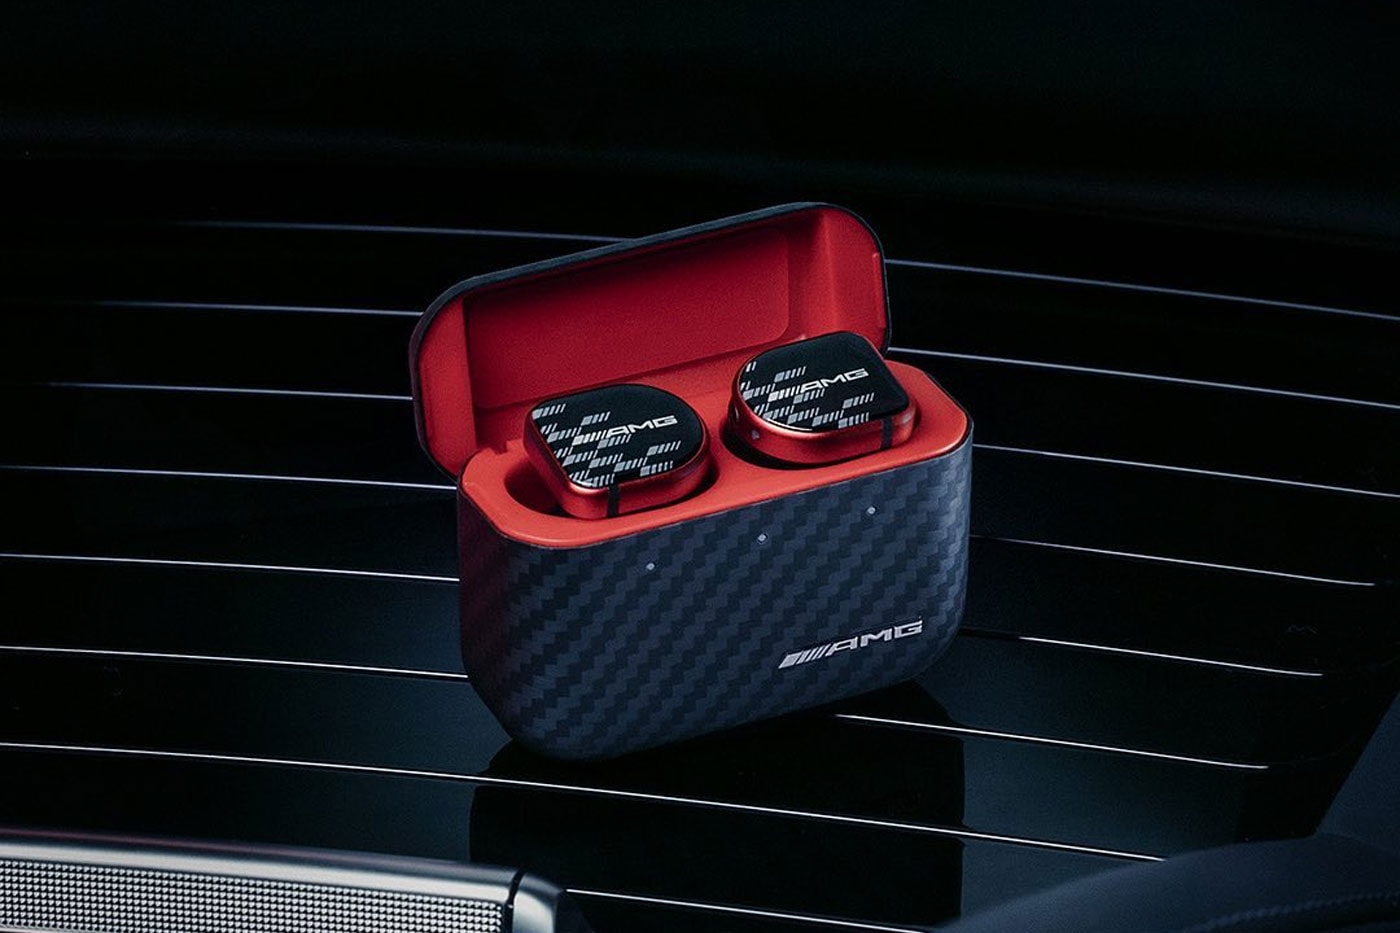 Master Dynamic Mercedes-AMG Deliver High-Performance Earphones kevlar carbon fiber magnesium mW08 MW75 MG20 MC100 headphones wireless charging pad alcantra release info date price